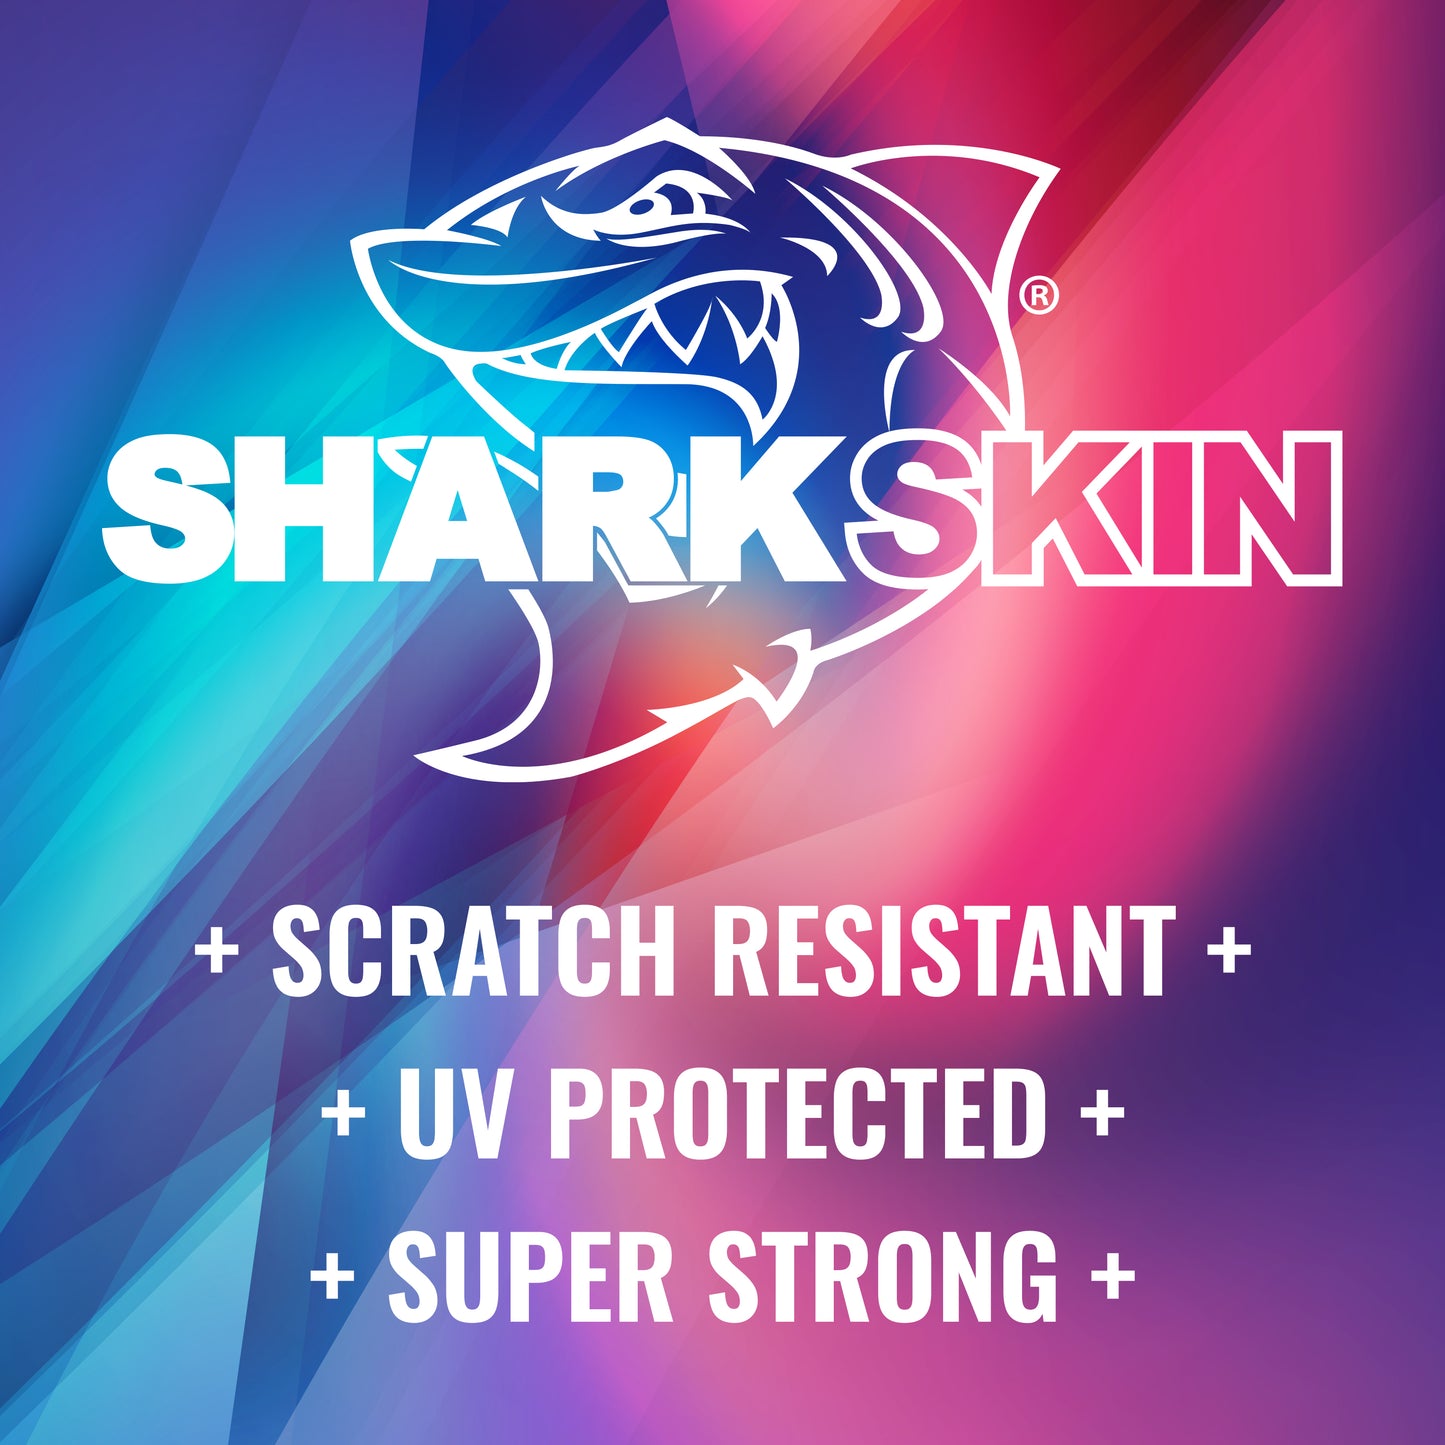 SharkSkin® Vinyl is exclusive to GetBranded. The material is scratch resistant, UV protected, and super strong.